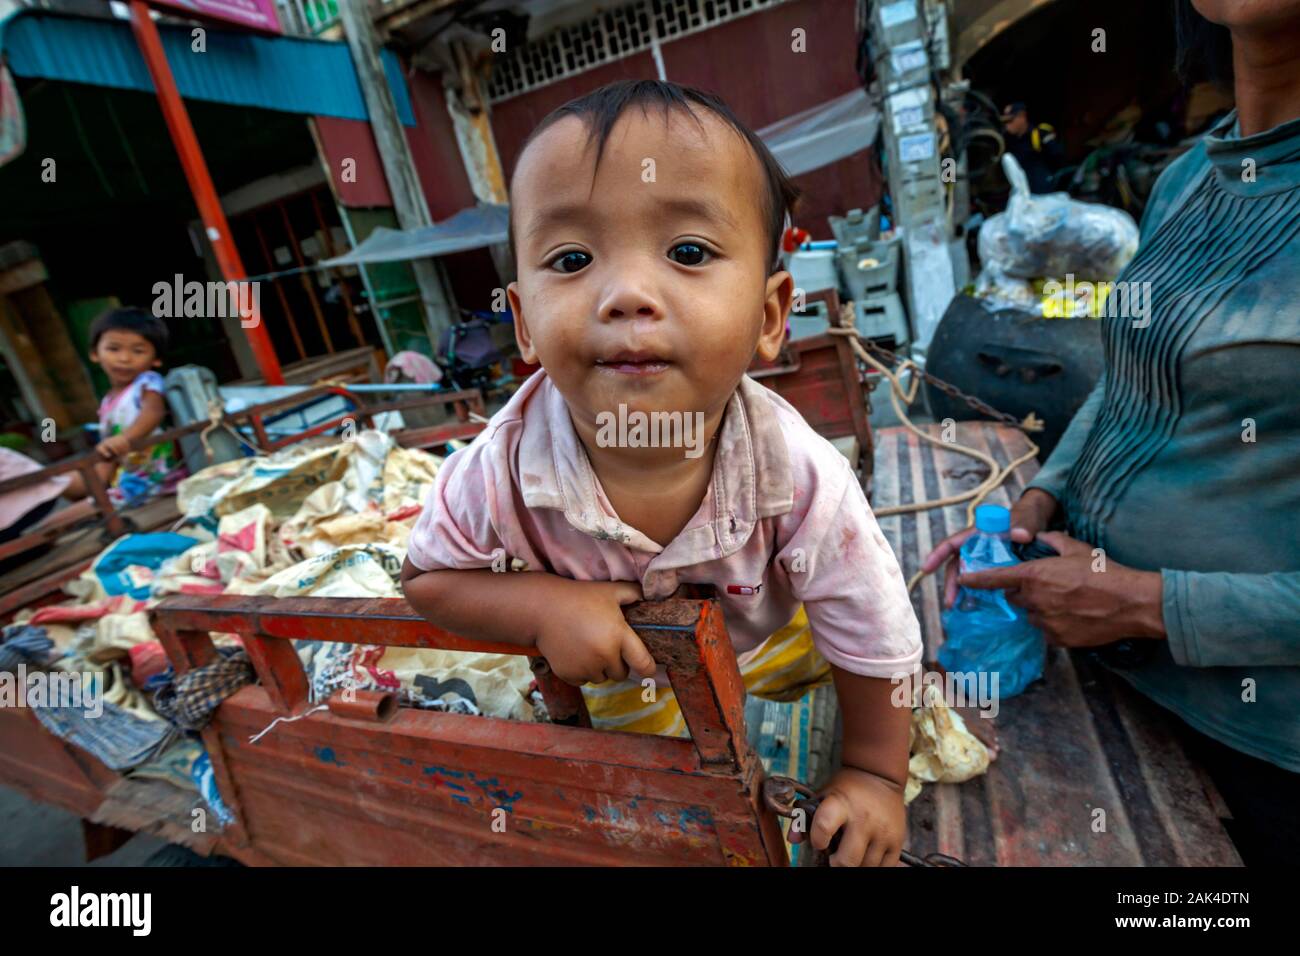 A poor toddler whose homeless family scavenges for recyclable material sits a vehicle used to transport recyclables in Kampong Cham, Cambodia. Stock Photo